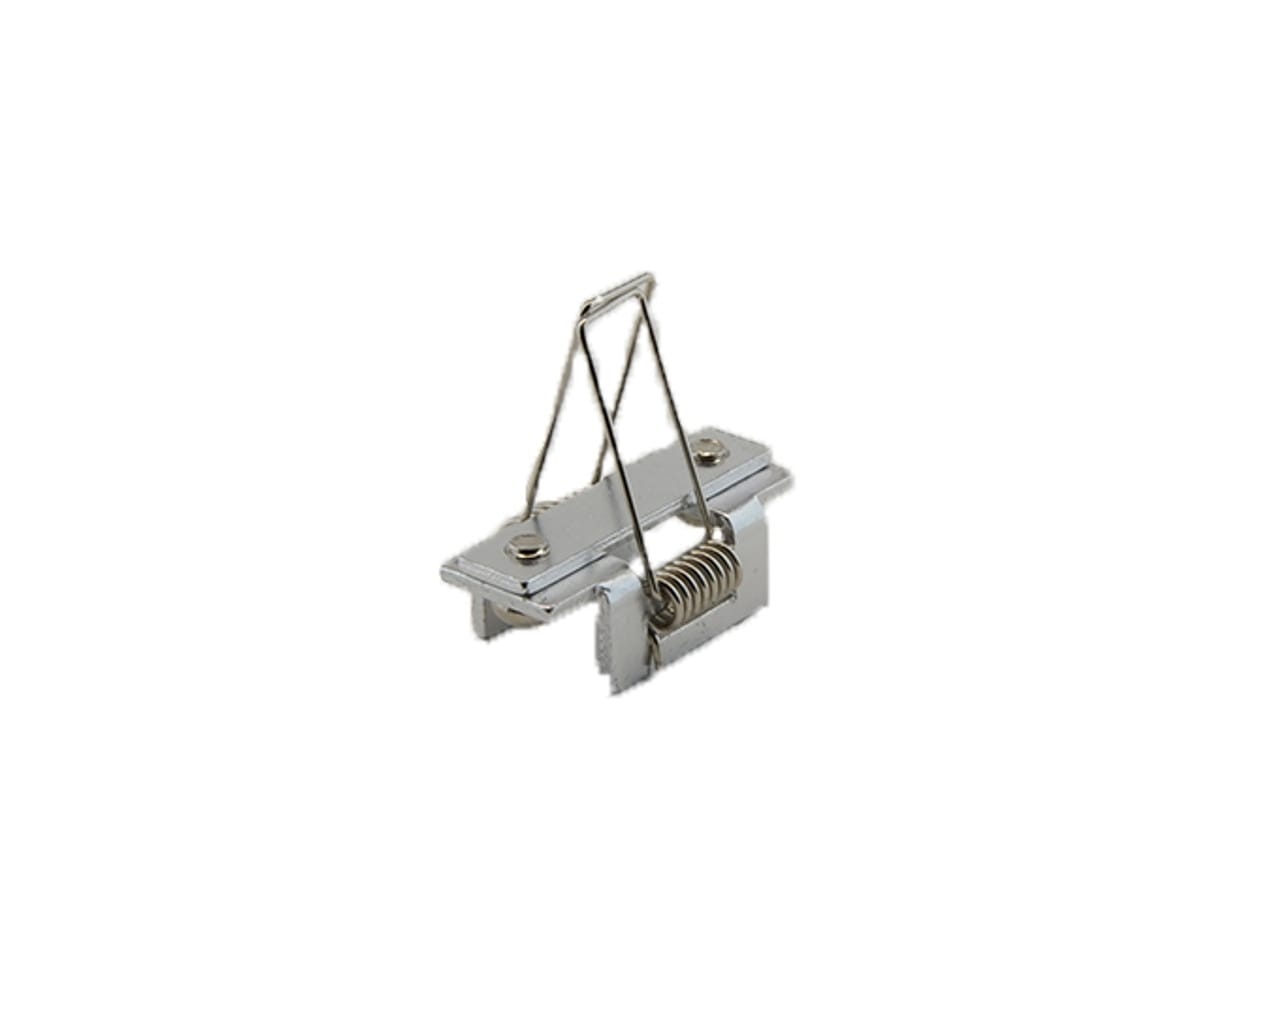 Stainless Steel Spring Mounting Clips for Recessed Drywall mounting  Aluminum Extrusion Q for Recessed LED Installations.